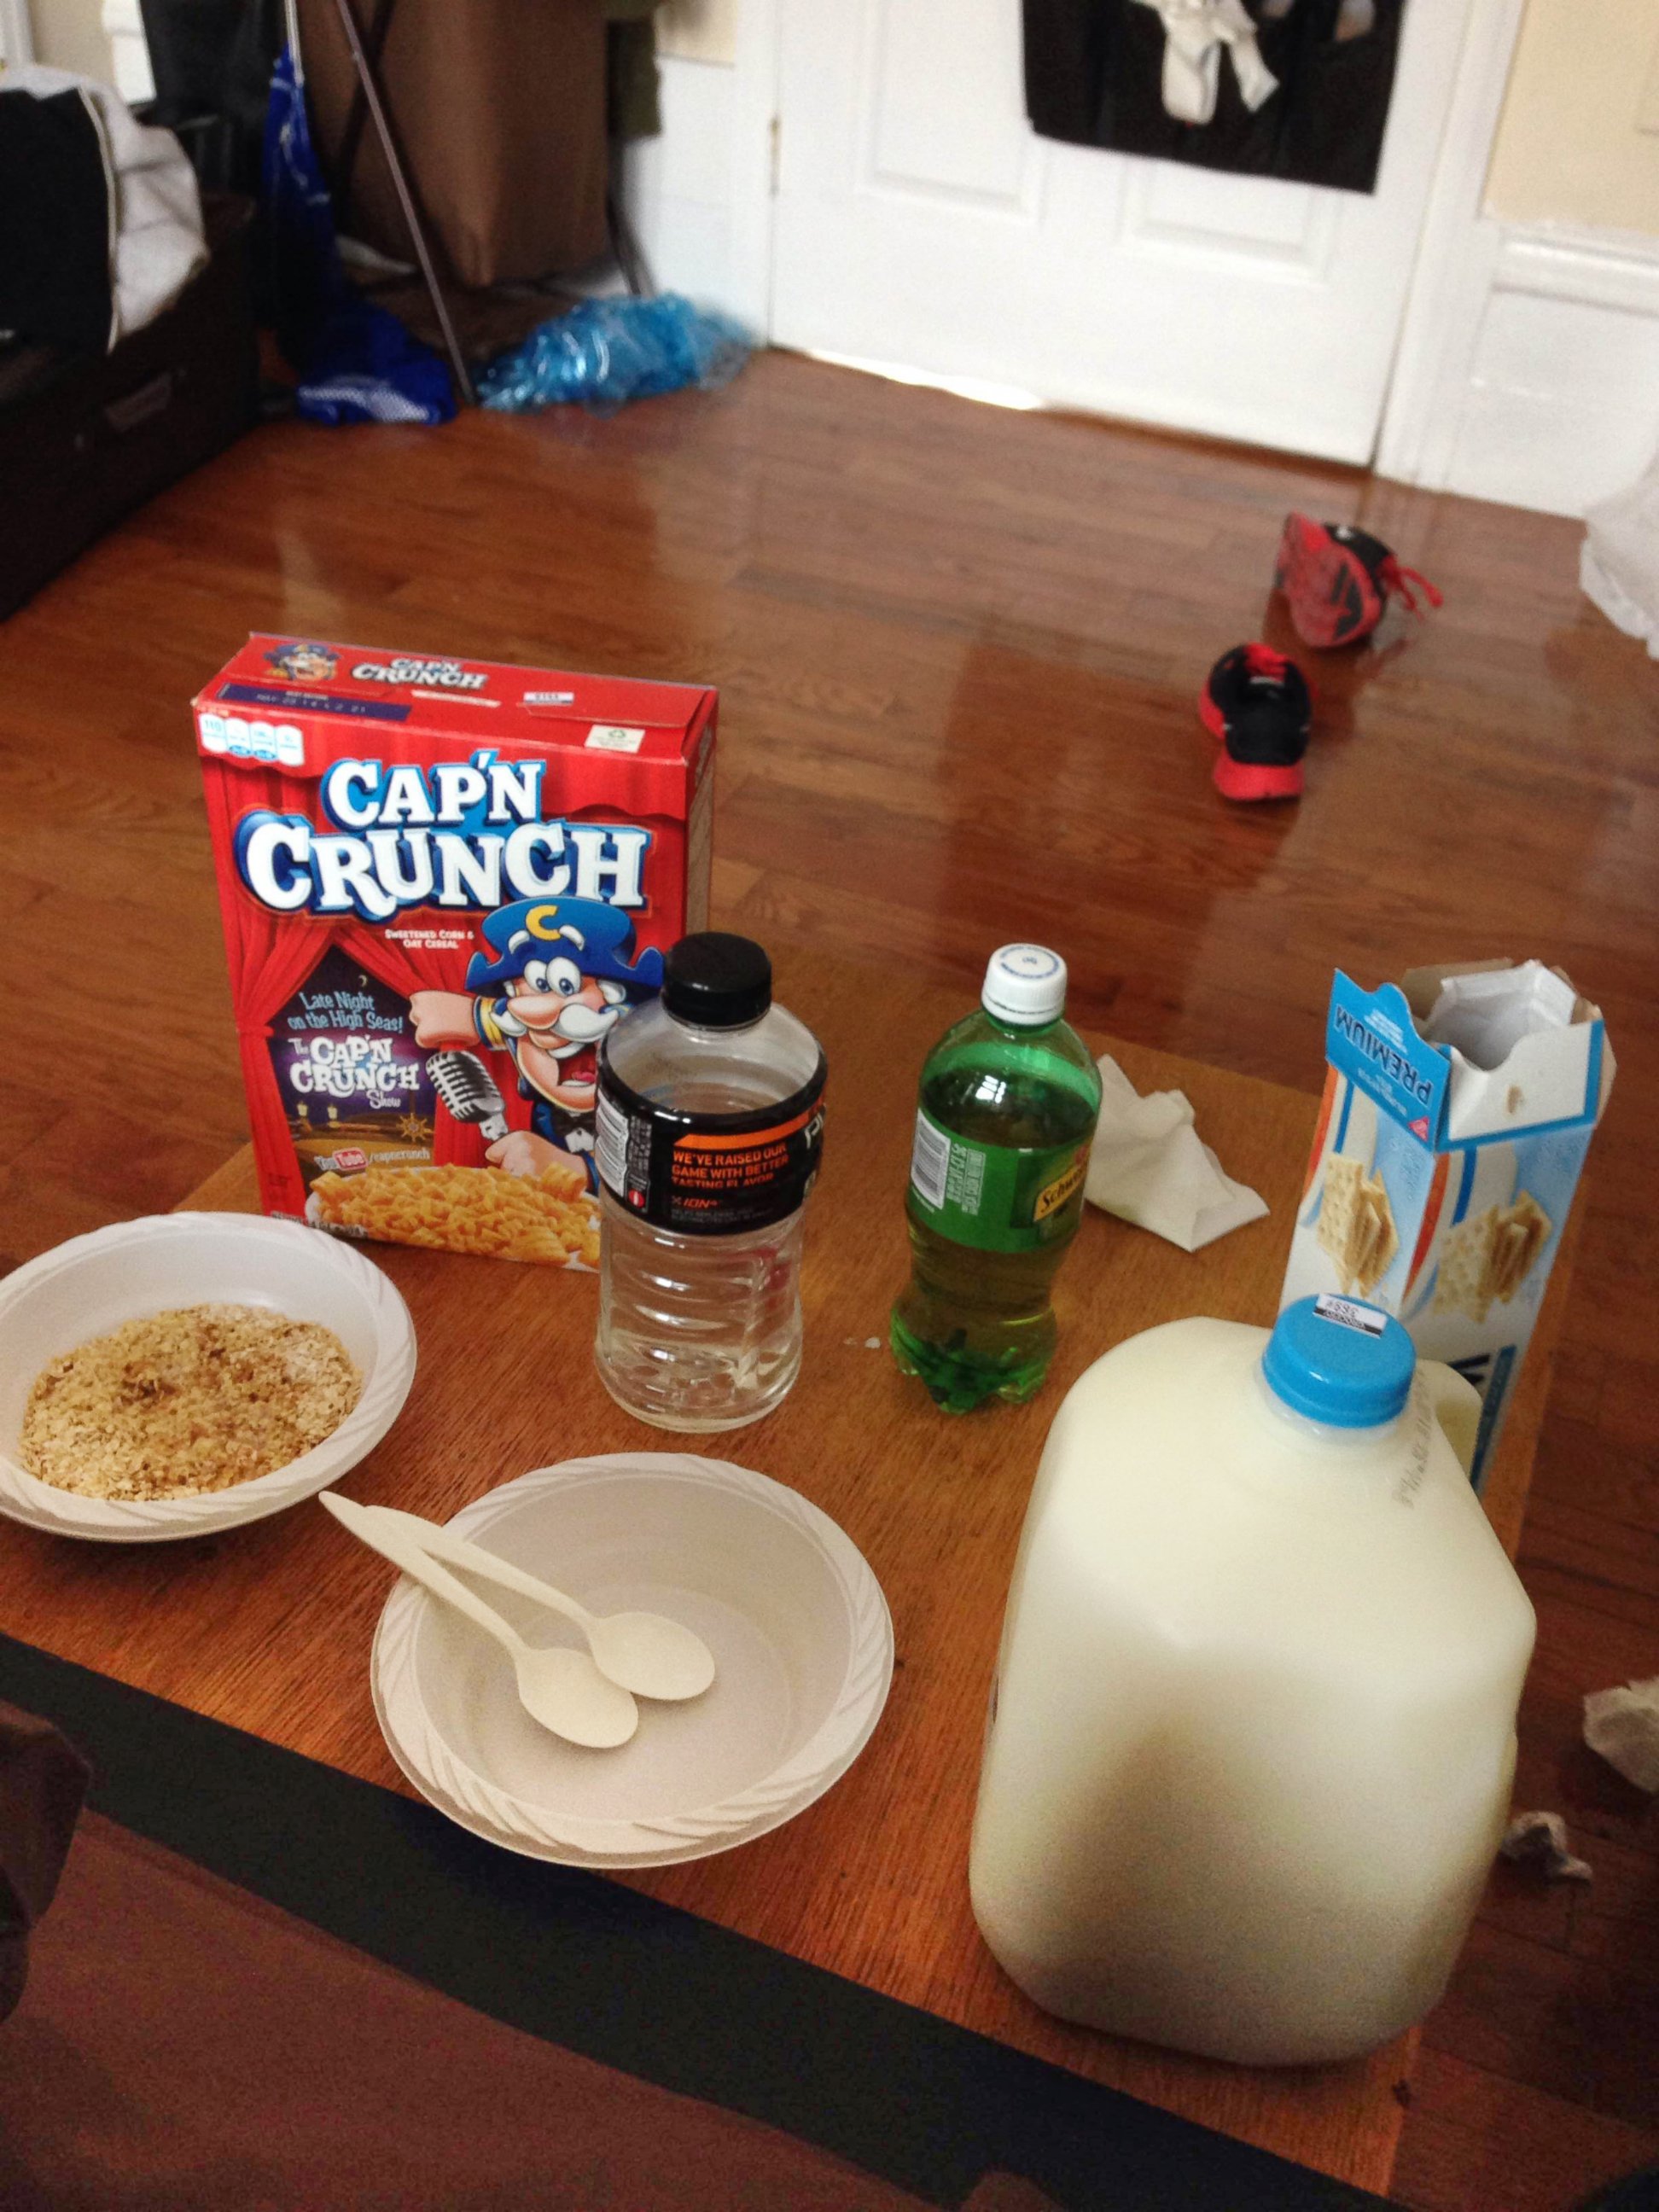 PHOTO: Before he knew what was wrong with him, Levy ate mostly cereal and bread, and drank mostly sports drinks and ginger ale.